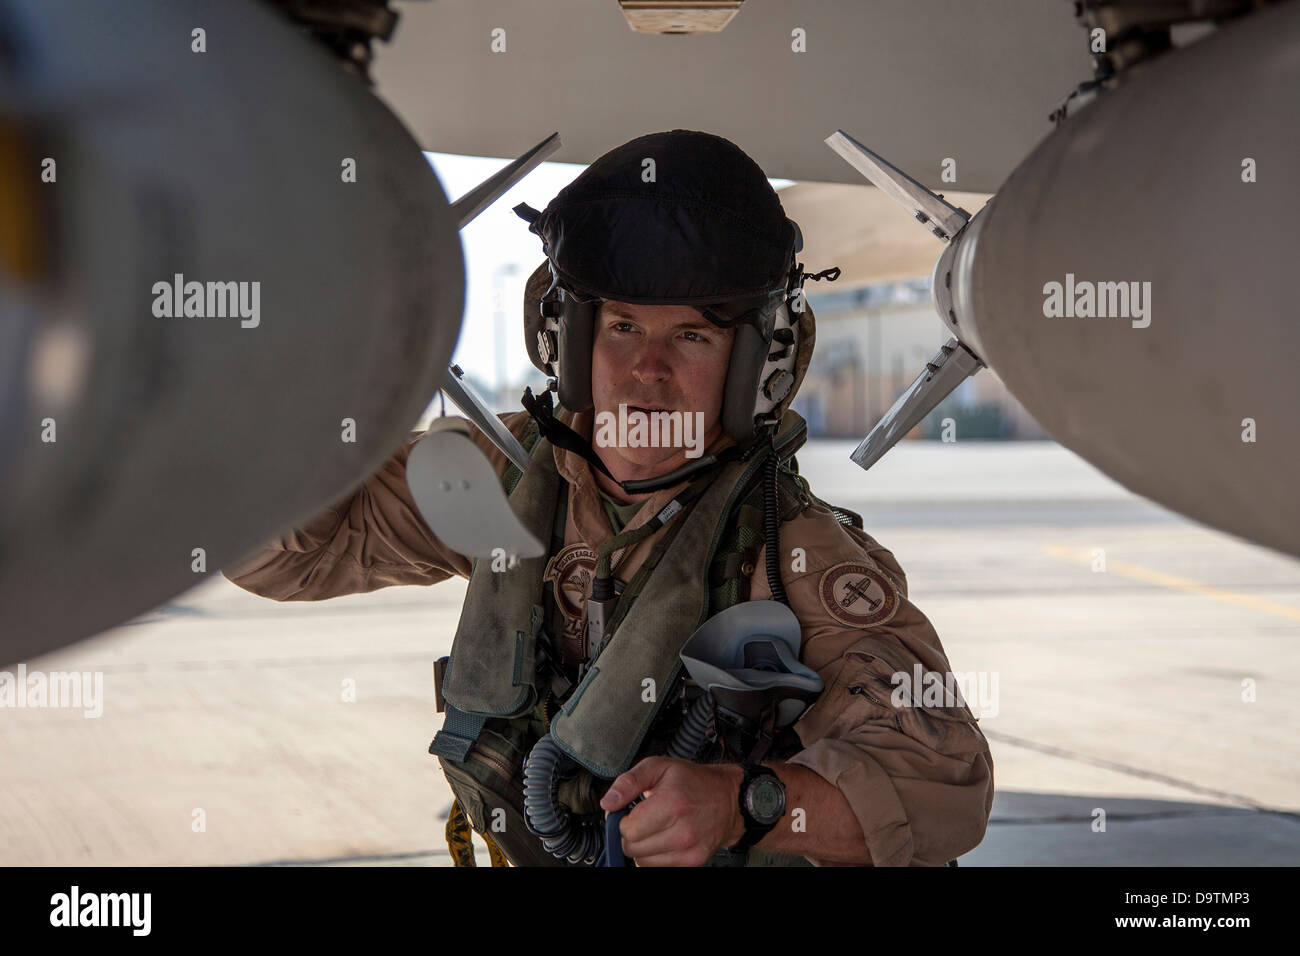 Marine Captain Matthew ”Toggaf” Holcomb from the VMFA-115 squadron performs pre-flight checks on his F-18 aircraft prior to takeoff. The Marine Fighter Attack squadron is operating out of a training base in Northern Jordan and is performing training and e Stock Photo